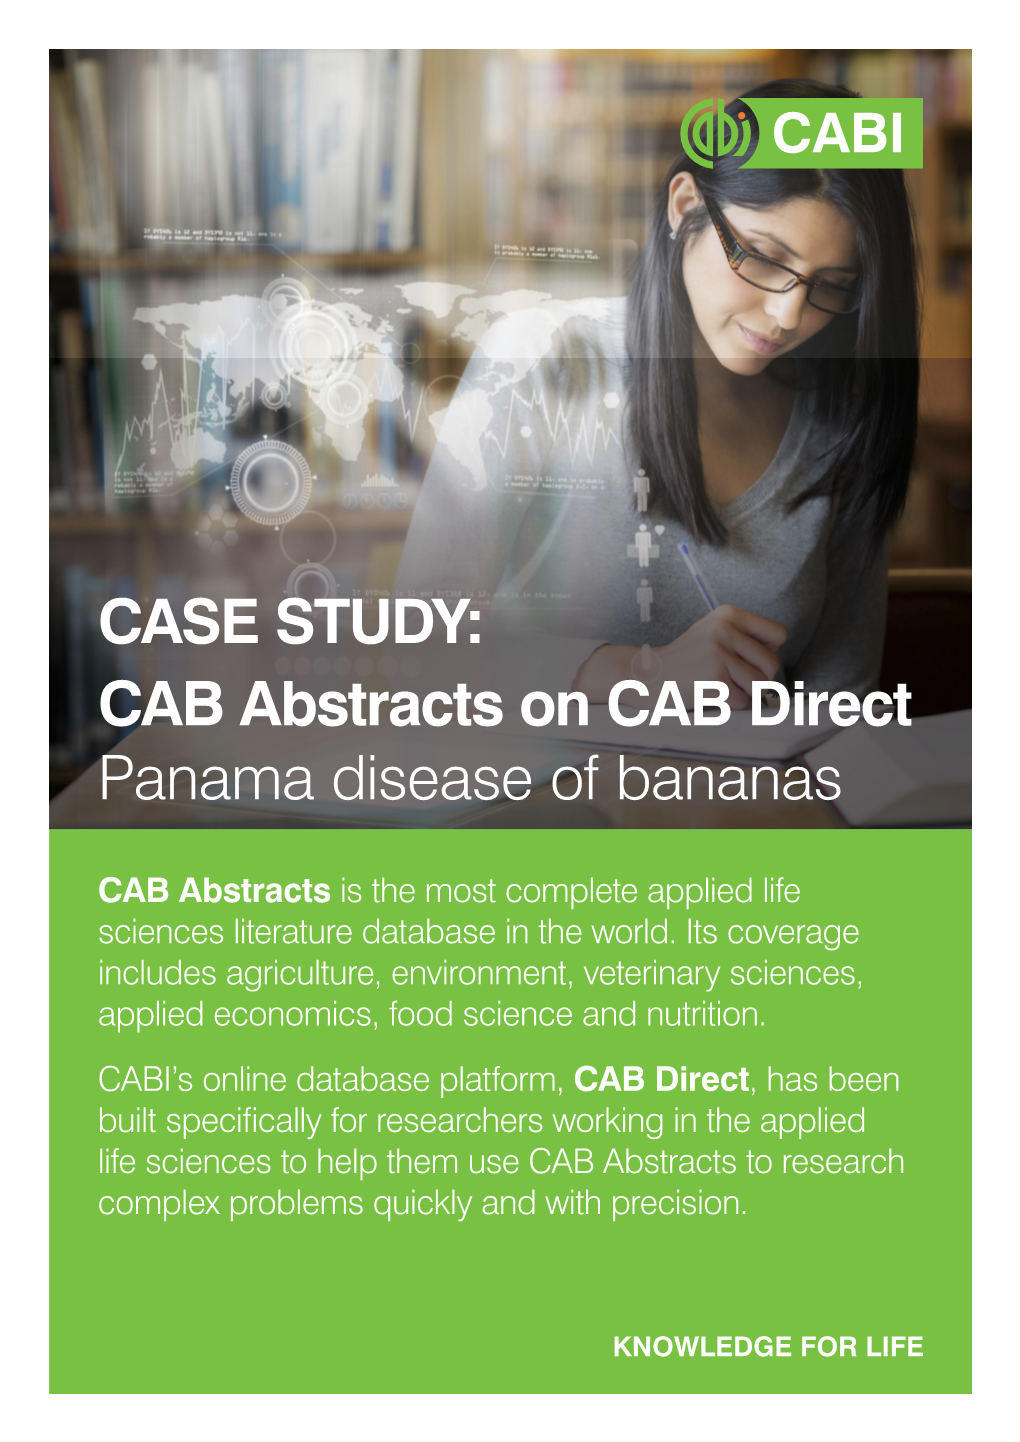 CASE STUDY: CAB Abstracts on CAB Direct Panama Disease of Bananas